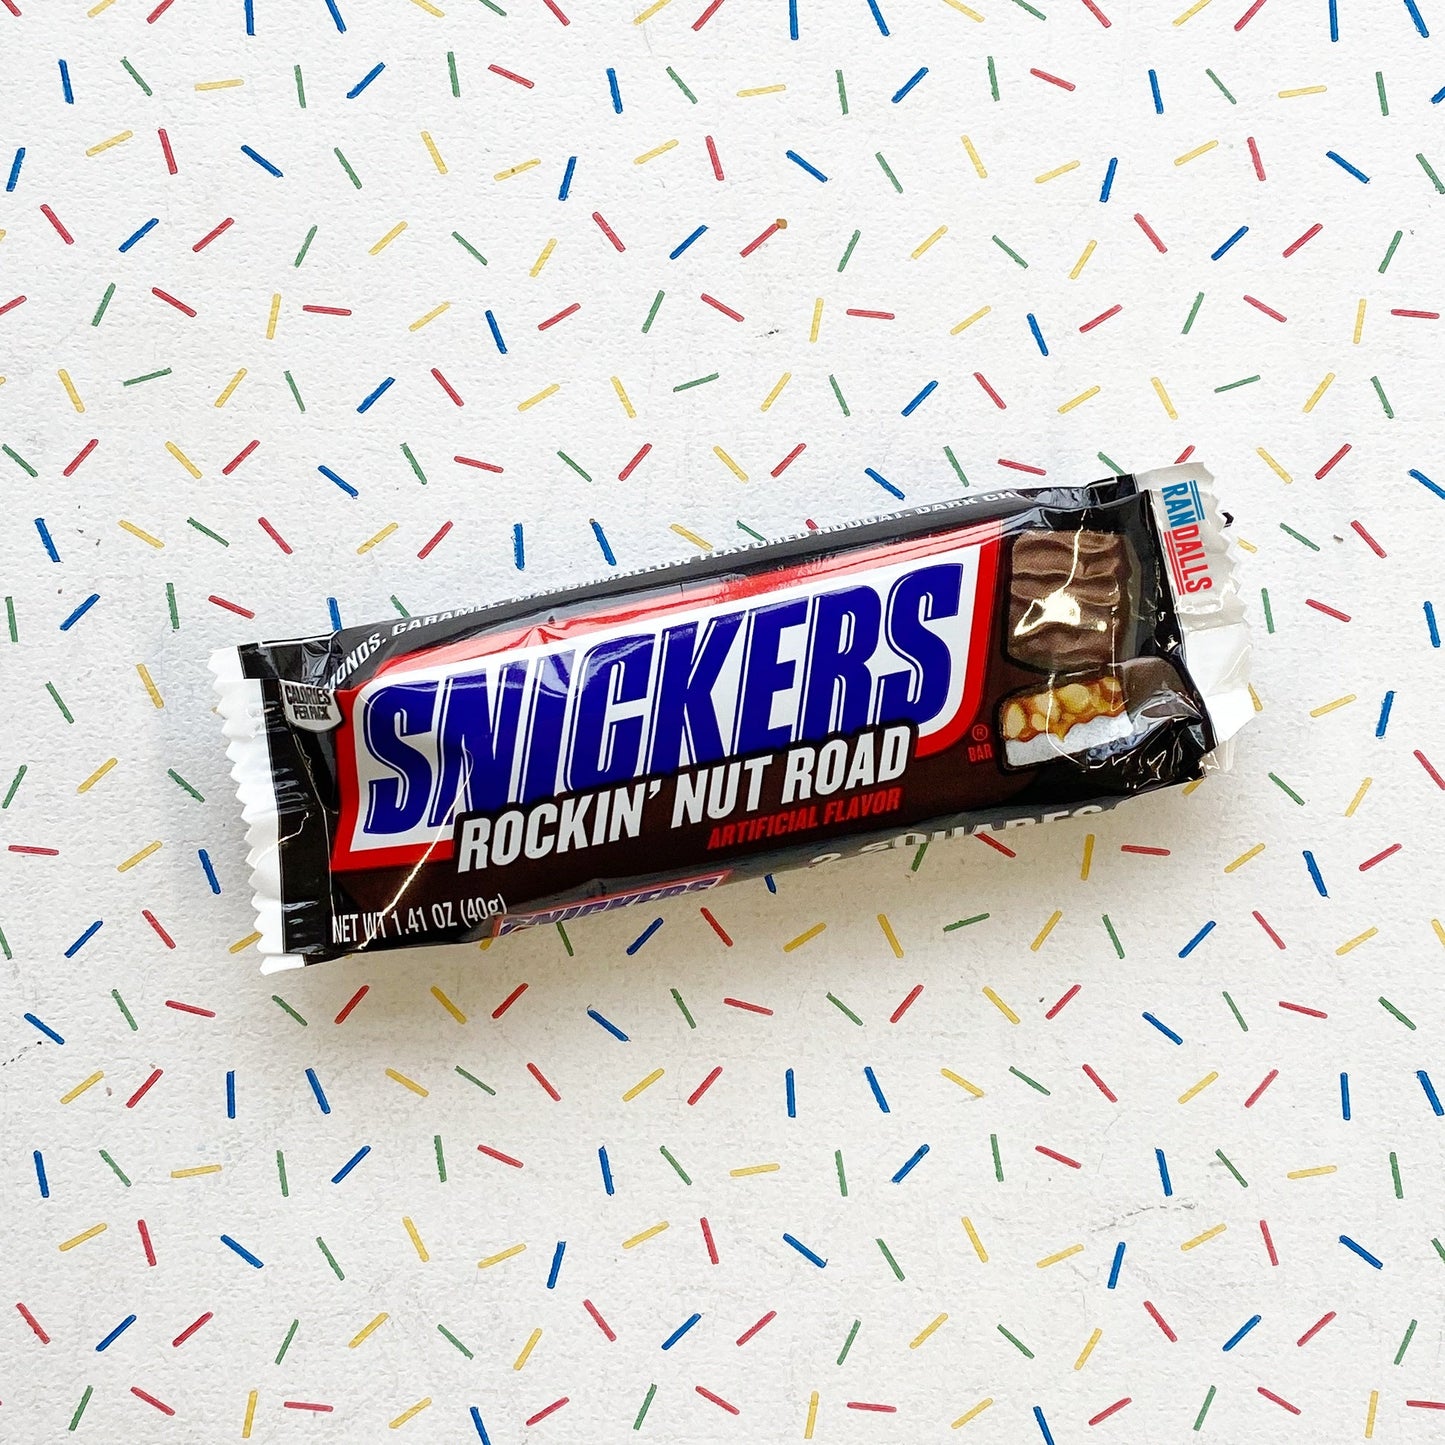 snickers, rockin' nut road, rocky road, american chocolate, american candy, usa, randalls,